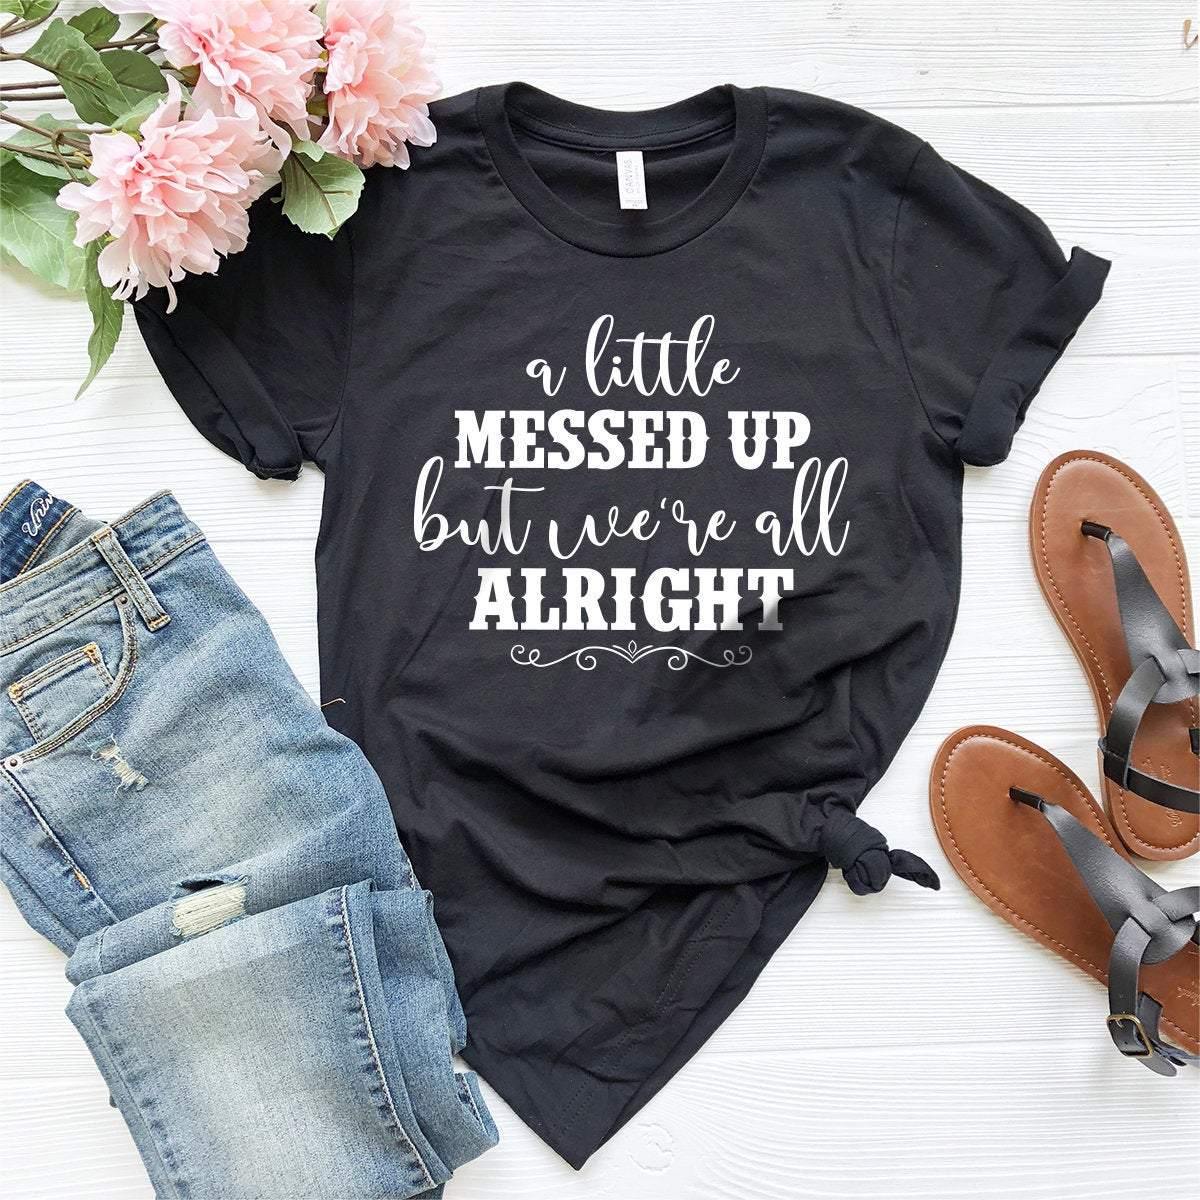 Country Saying Shirt, Country Girl Shirt, Country Music Tee, Country Festival Shirt, Western Shirt, A Little Messed But We're All Alright - Fastdeliverytees.com